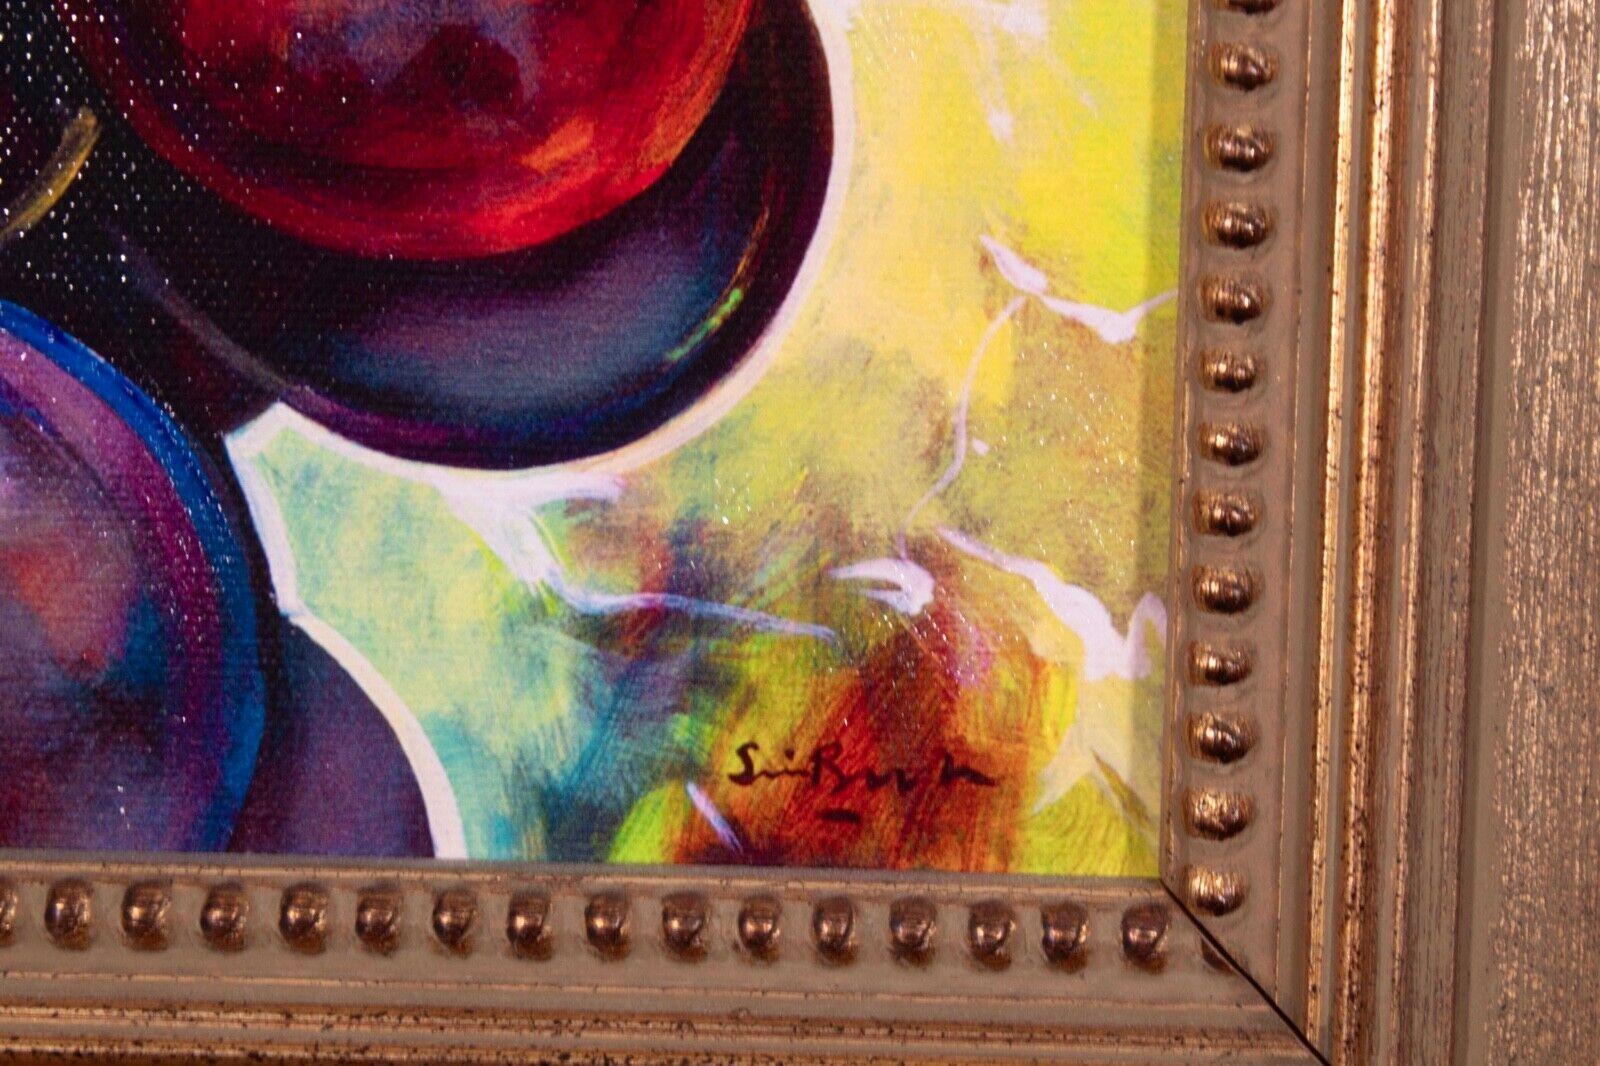 Simon Bull Grapes Giclee Signed Unique Acrylic Painting on Verso Framed 11/195 For Sale 3